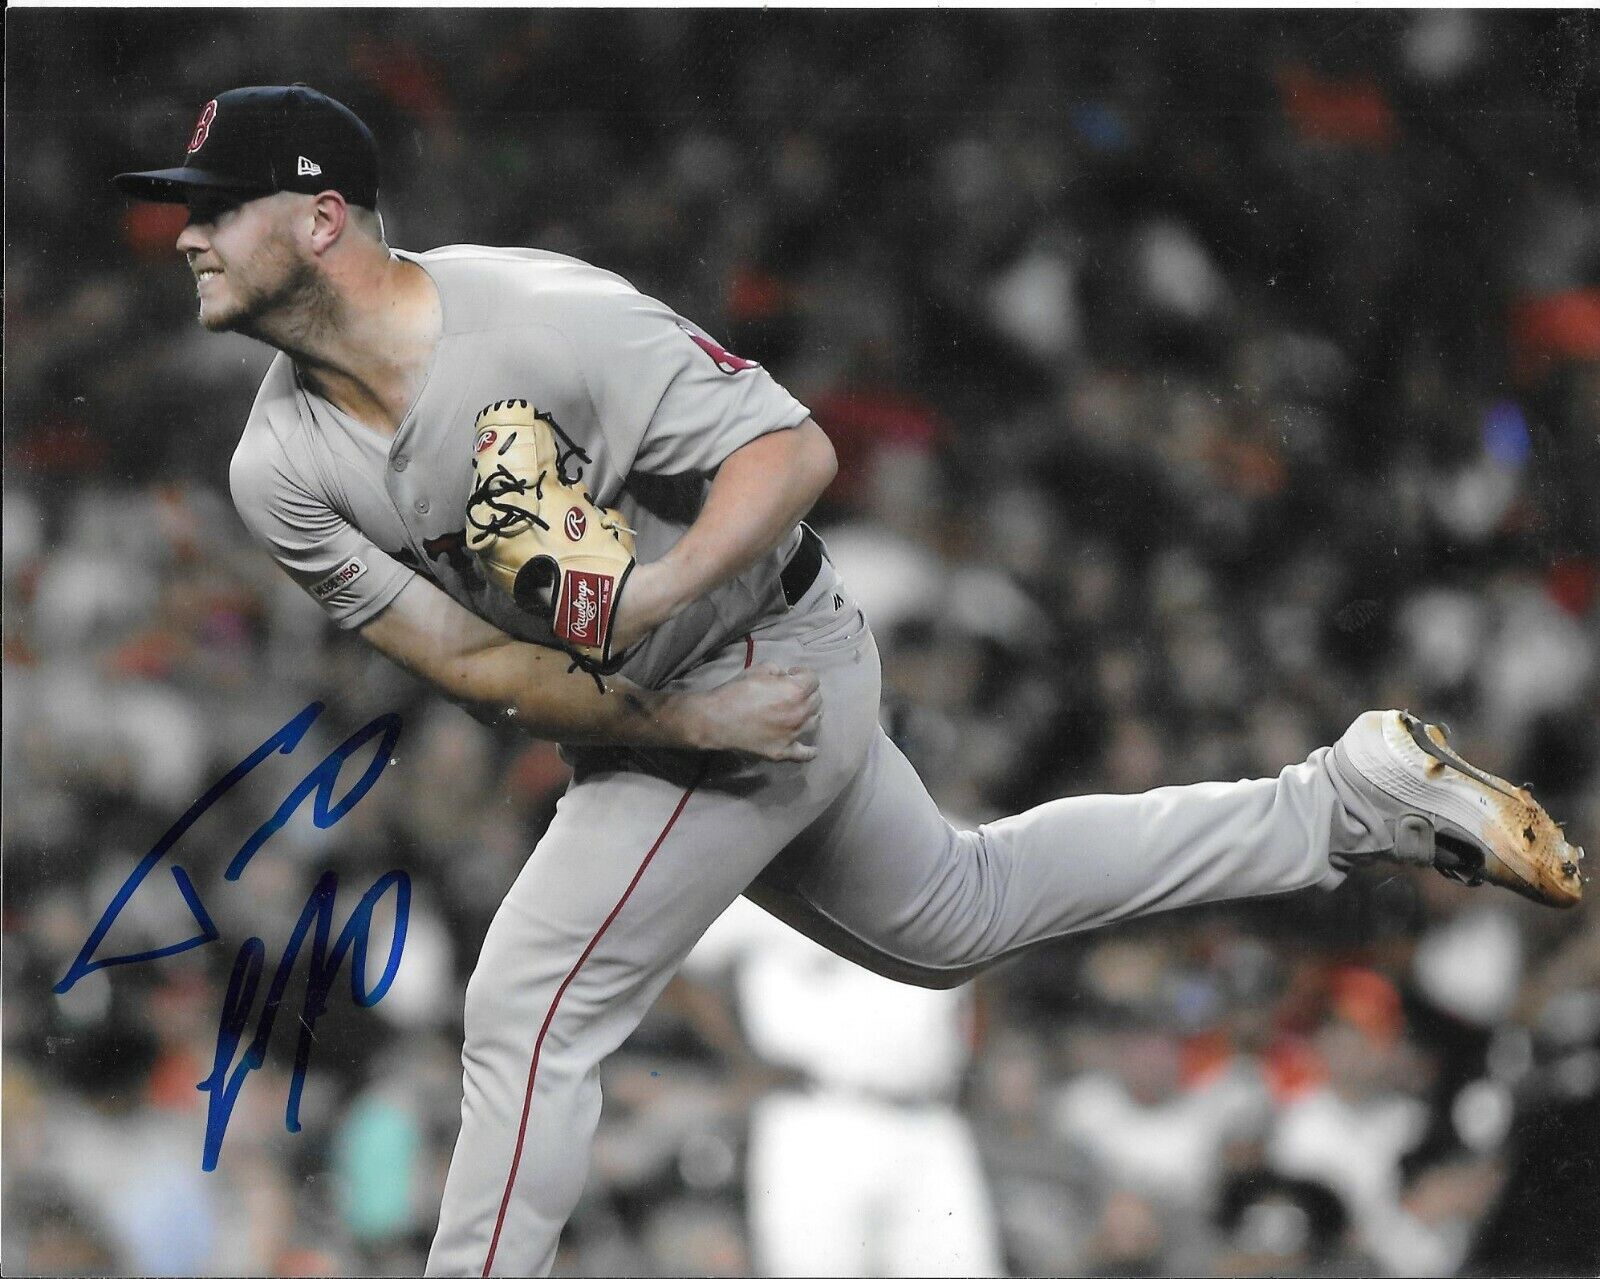 RED SOX STAR TRAVIS LAKINS SIGNED BOSTON RED SOX 8X10 PHOTO W/COA